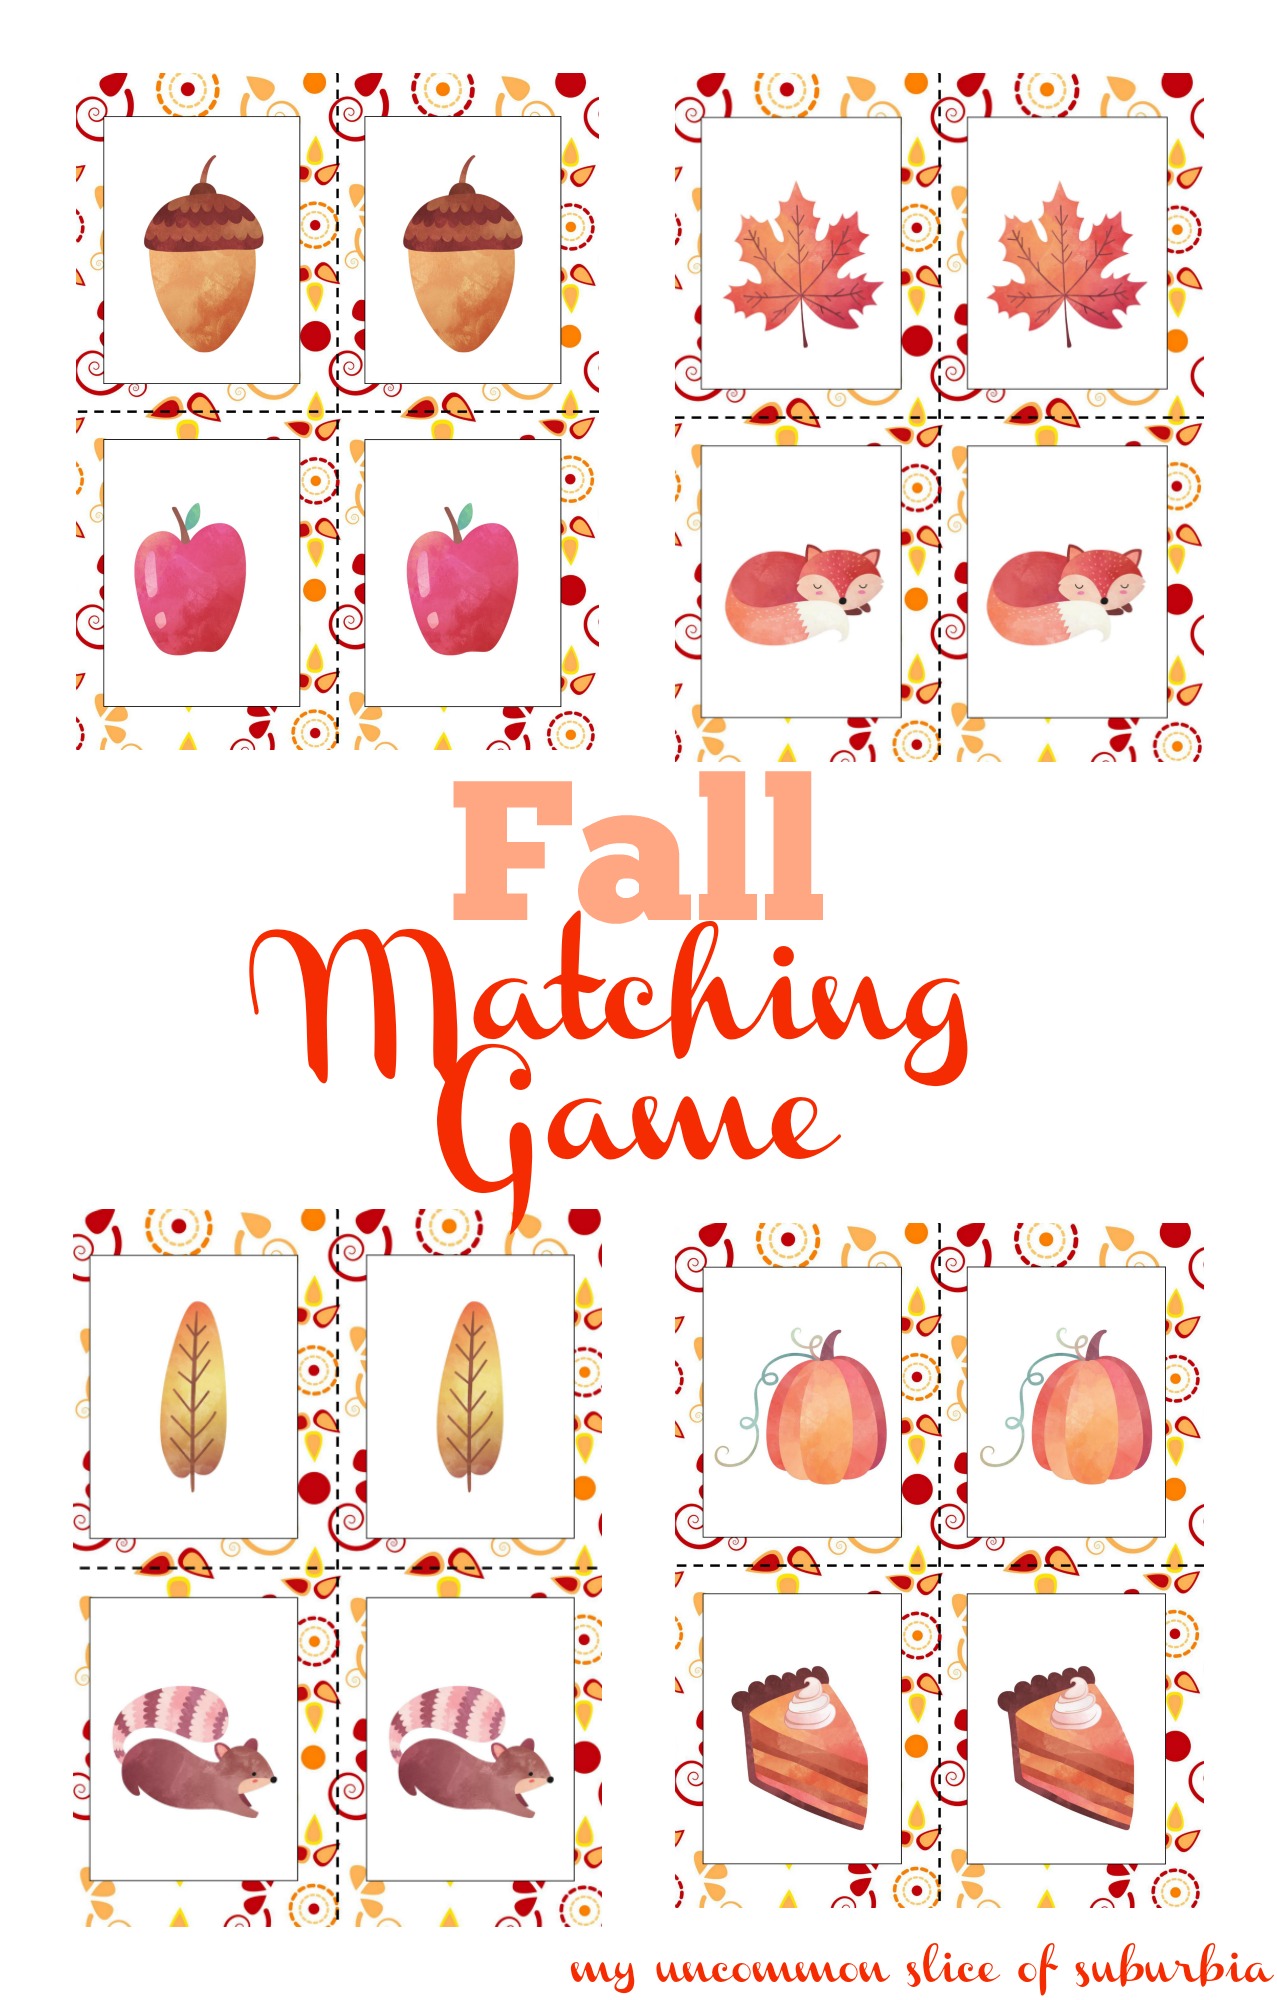 Fall Match Game  Play Fall Match Game on PrimaryGames